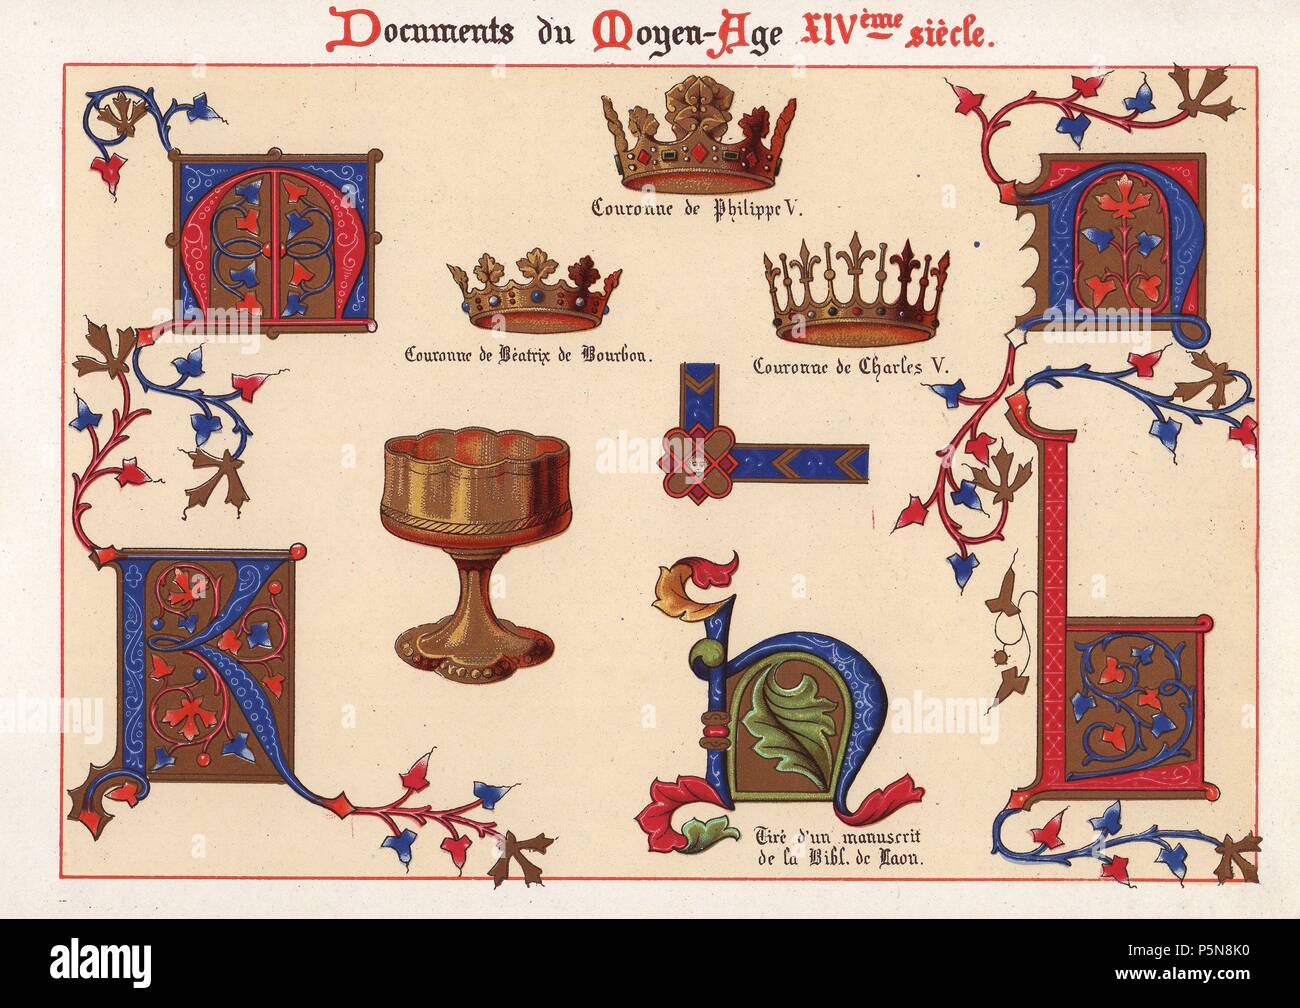 Illuminated letters, crown of Philippe V, crown of Beatrix de Bourbon,  crown of Charles V, and golden cup taken from a manuscript in the  Bibliotheque de Laon.. . Ernest Guillot "Ornementation des